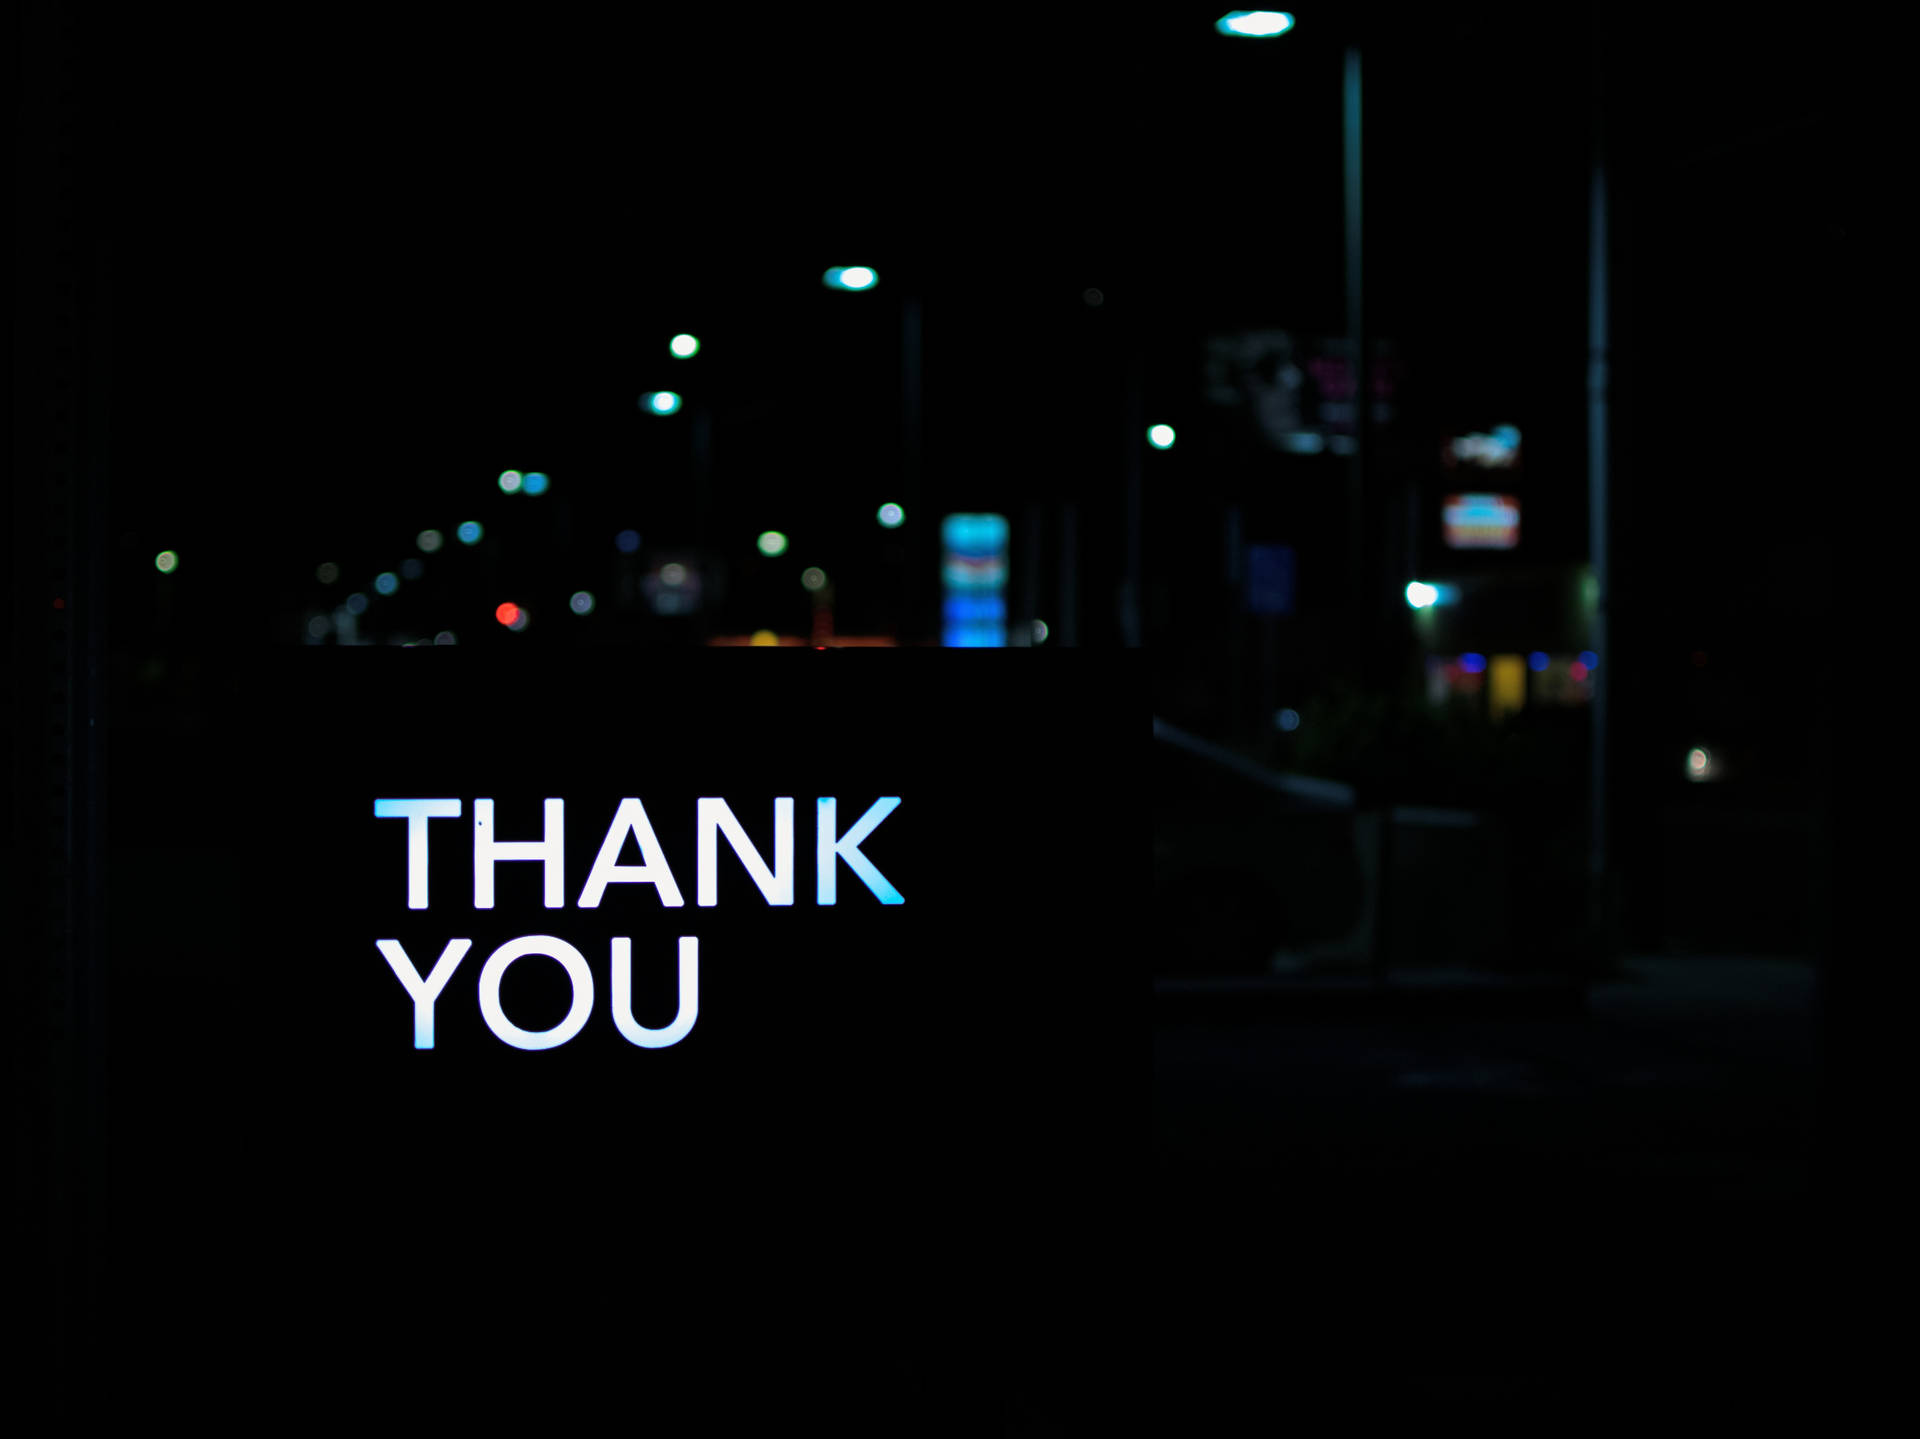 Thank You With Night City View